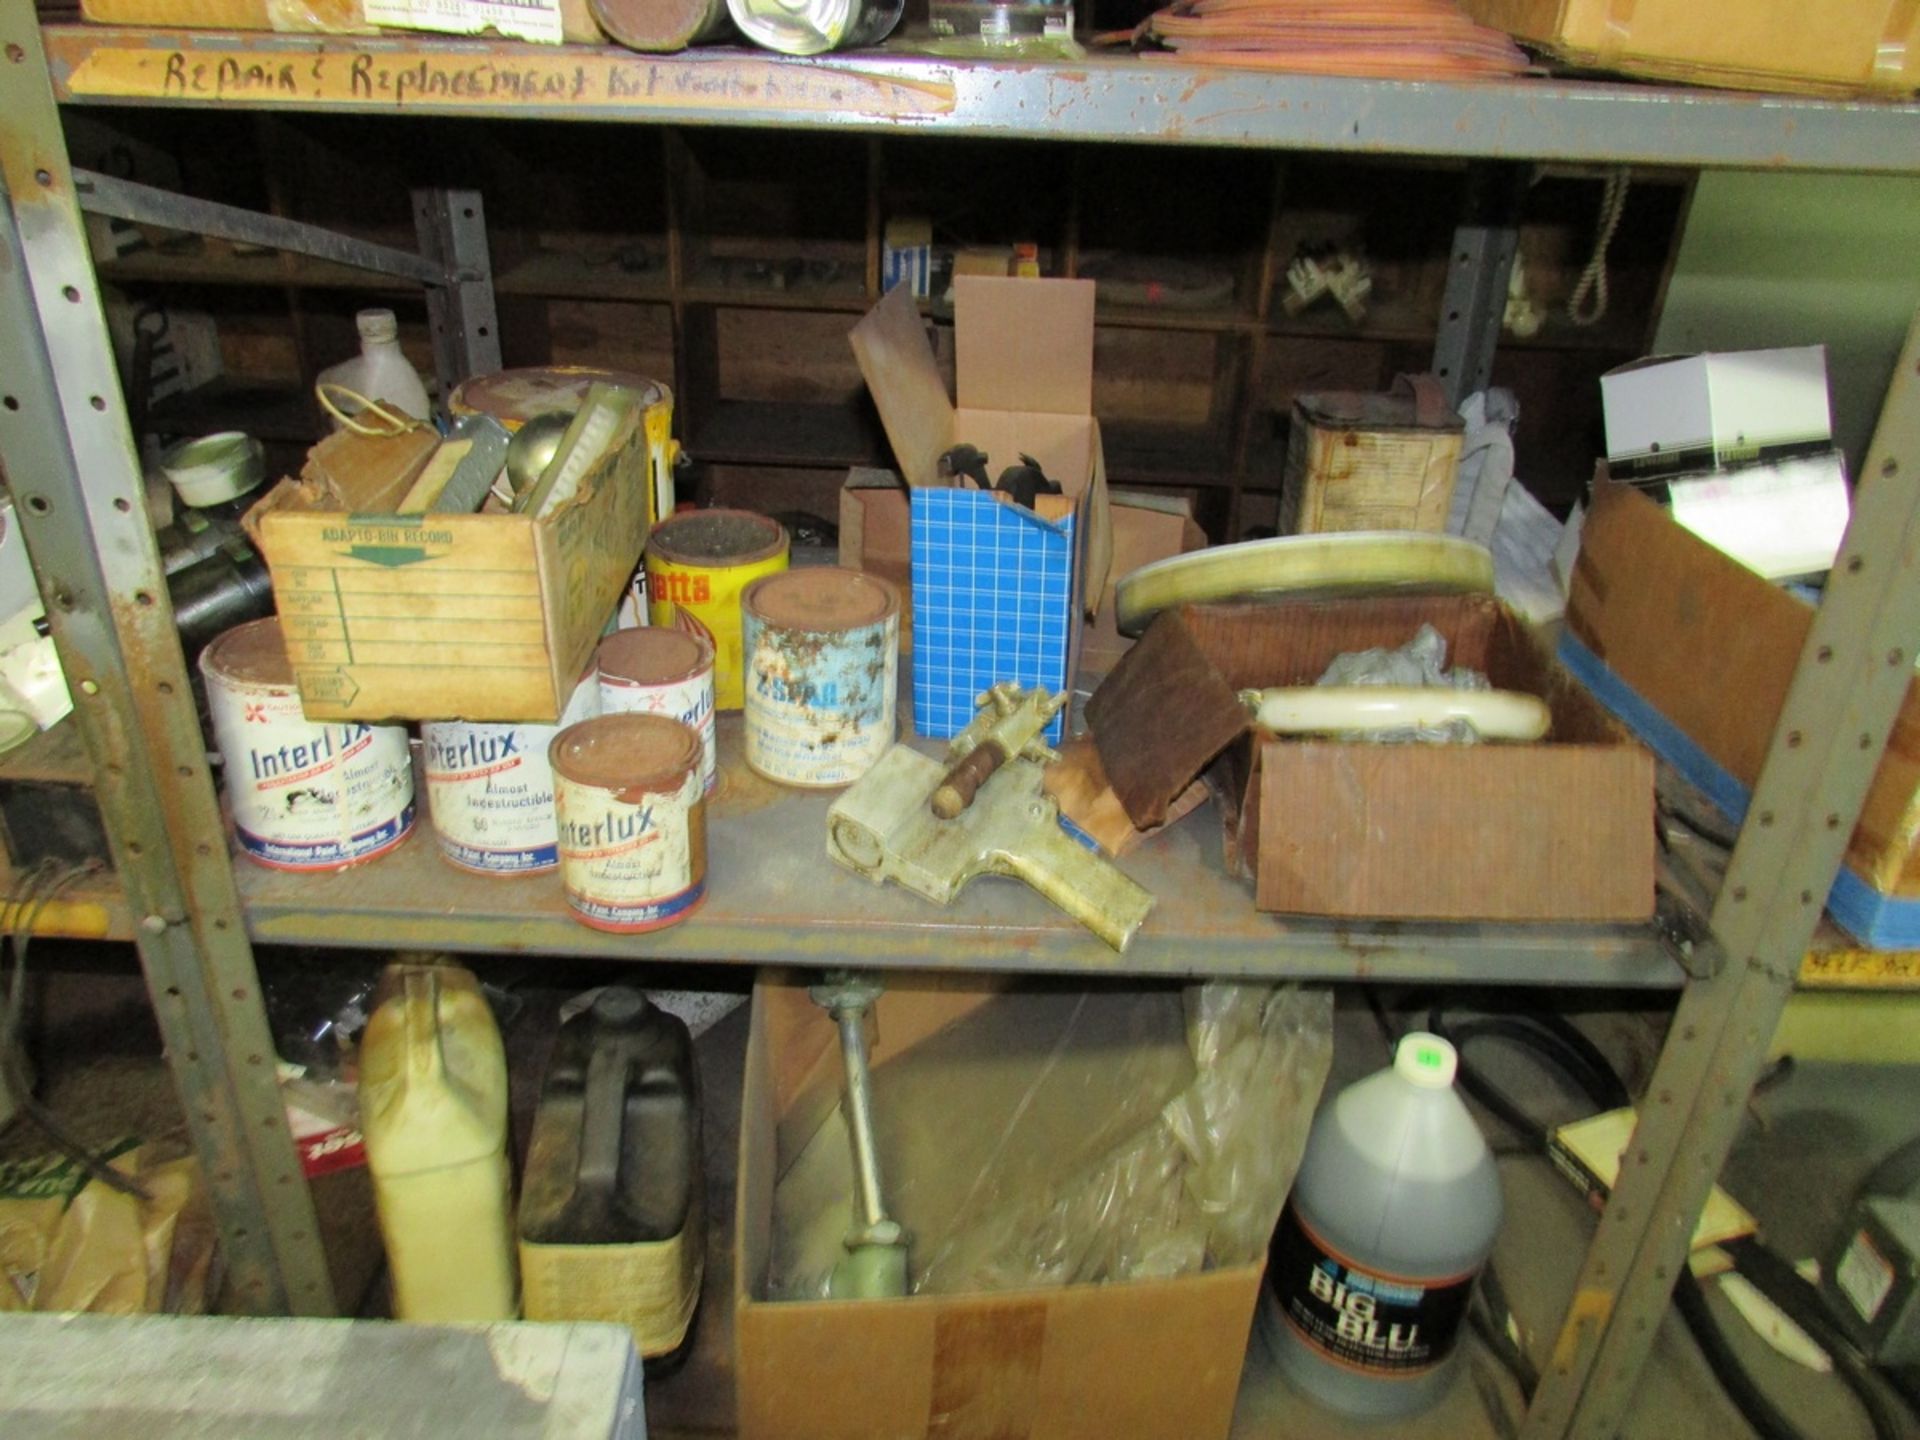 Contents of Tool Room, To Include Adjustable Shelving Units, Assorted Hand Tools, Pipe Wrenches, - Image 31 of 32